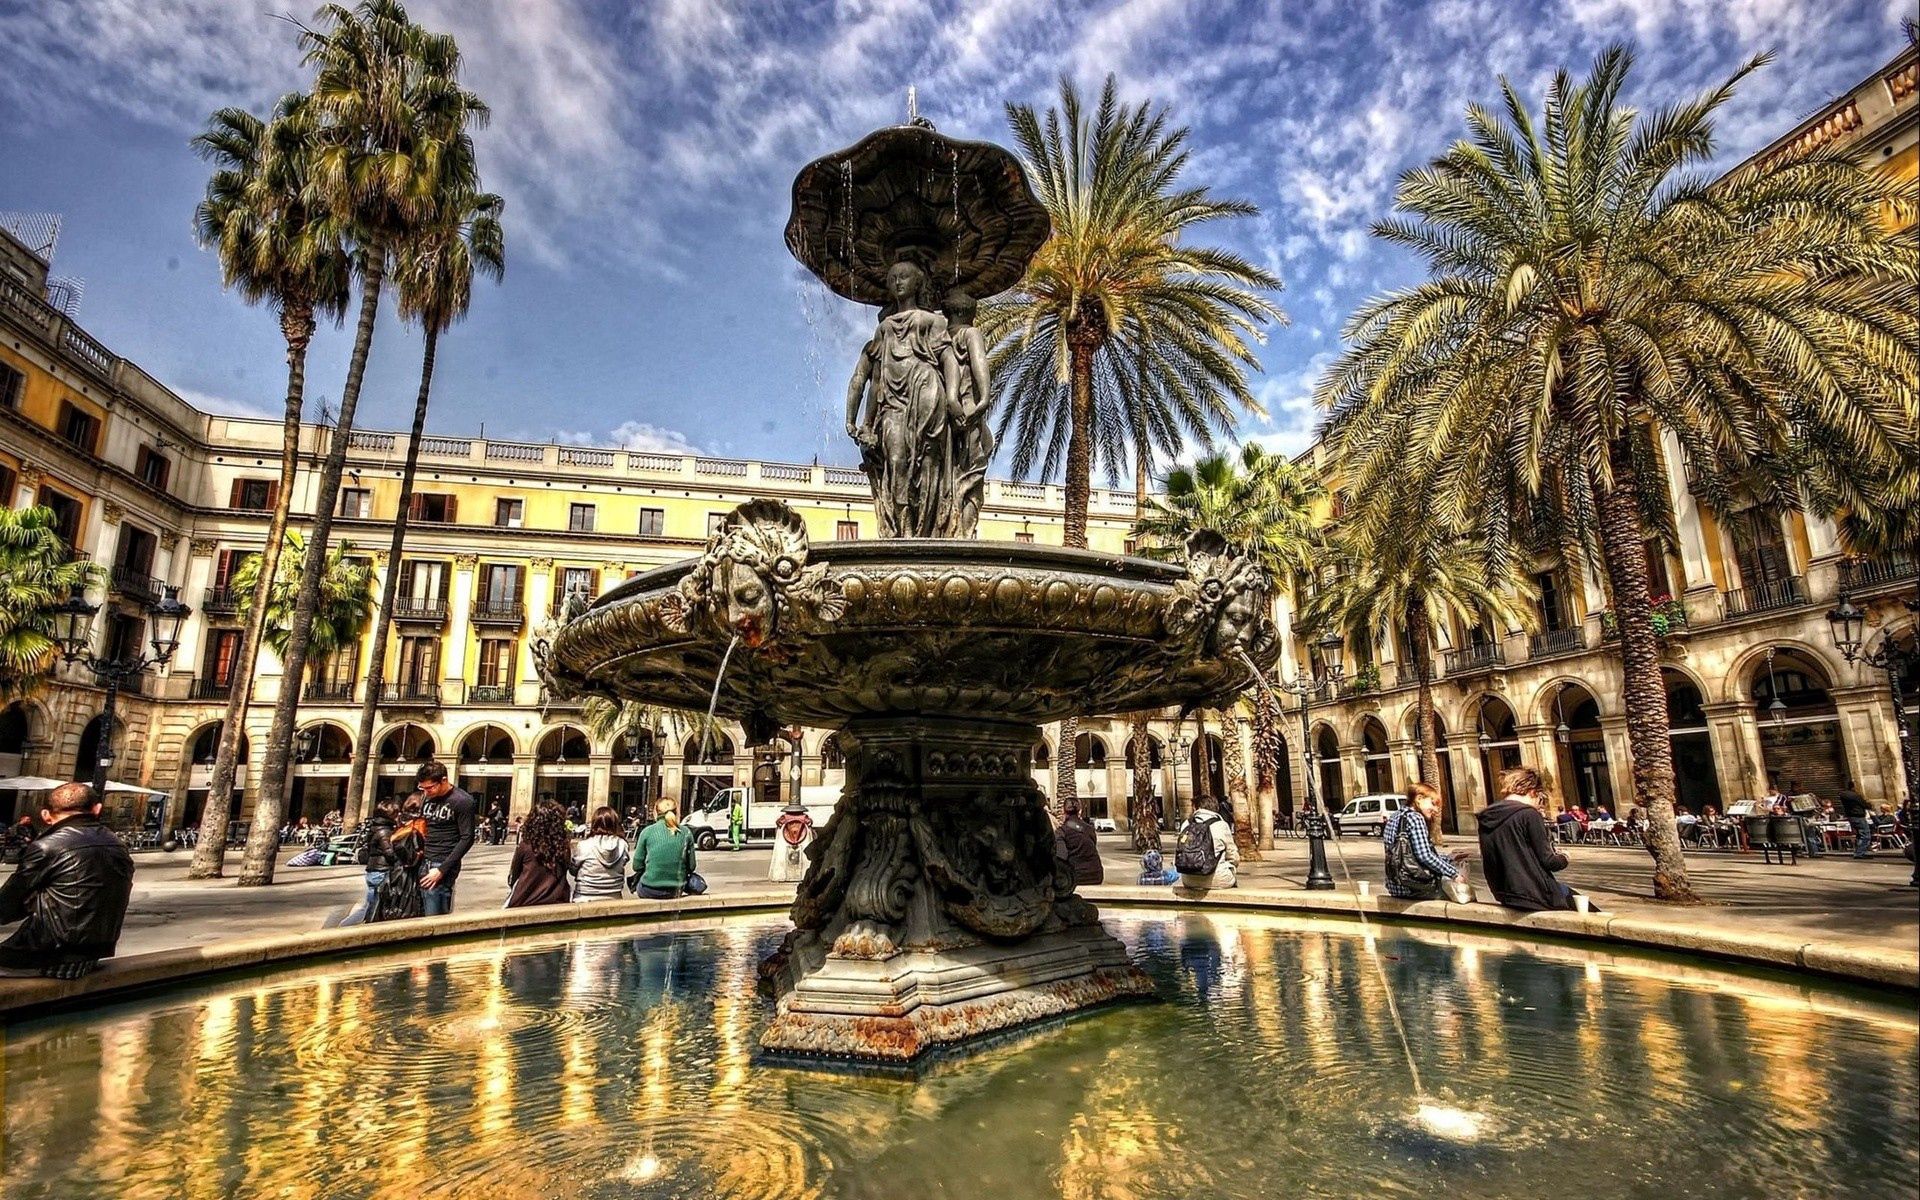 cities, people, architecture, palms, fountain, building, shine, light, hdr, day